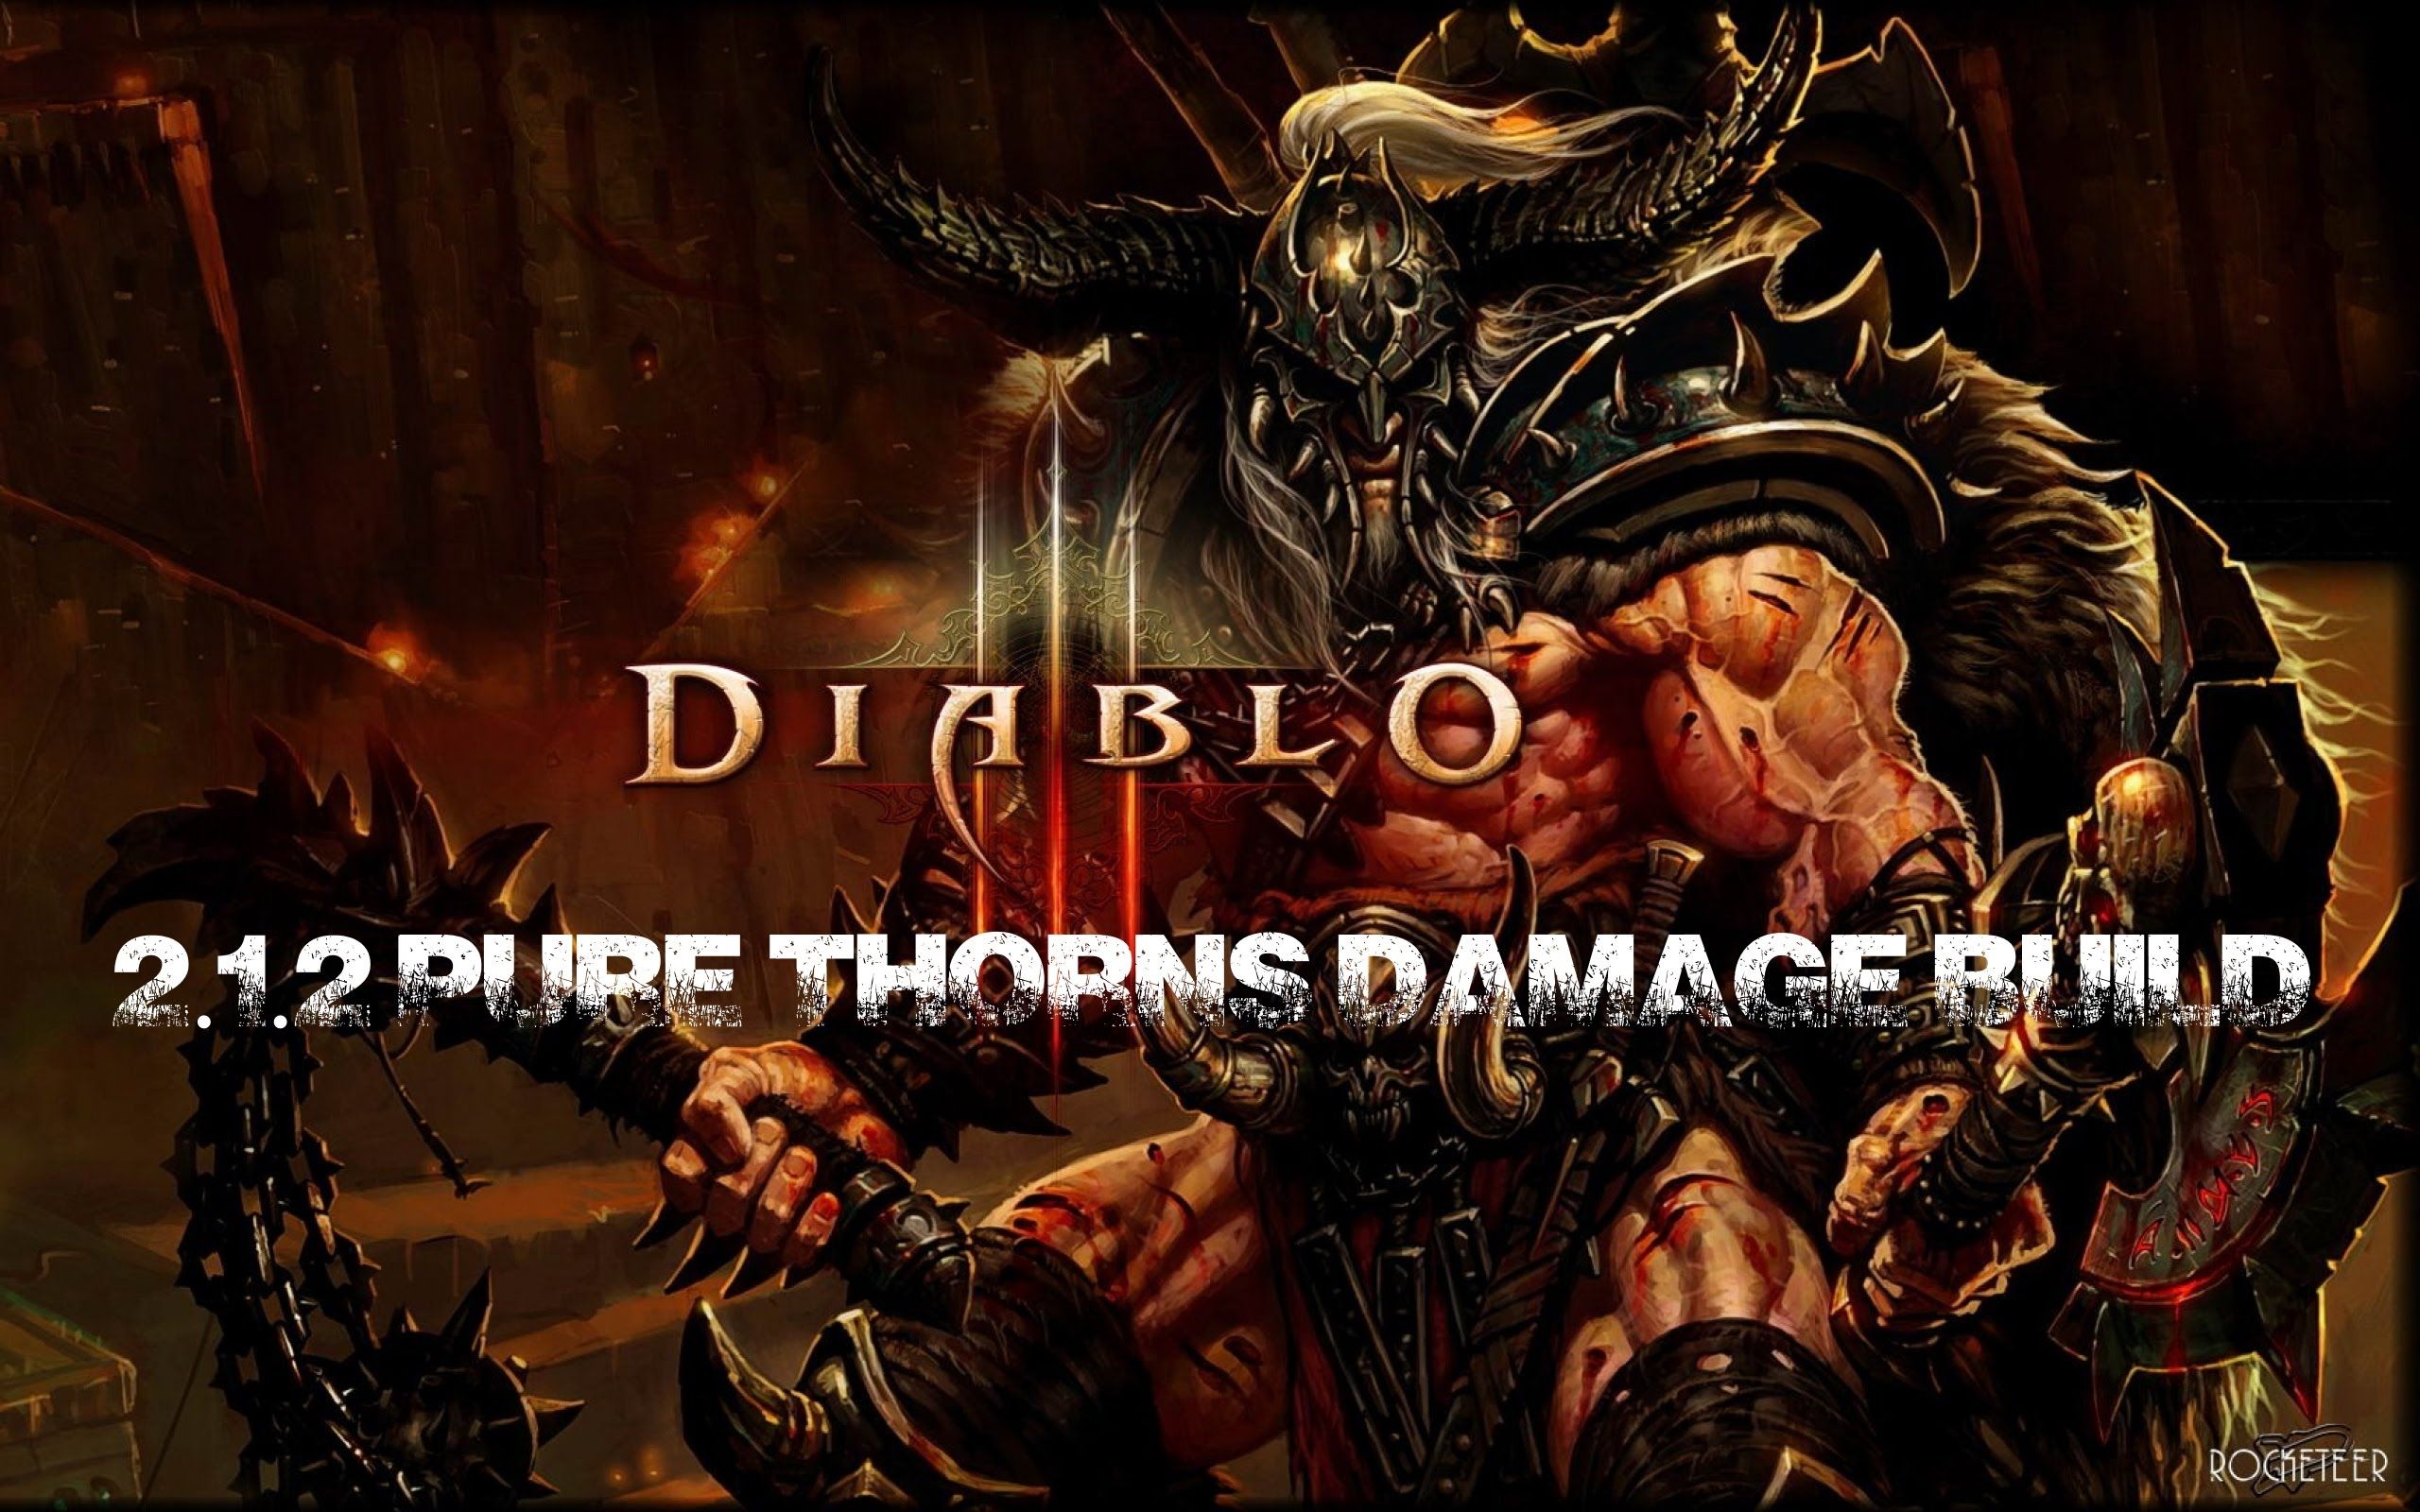 Diablo 3 what kind of damage is thorns